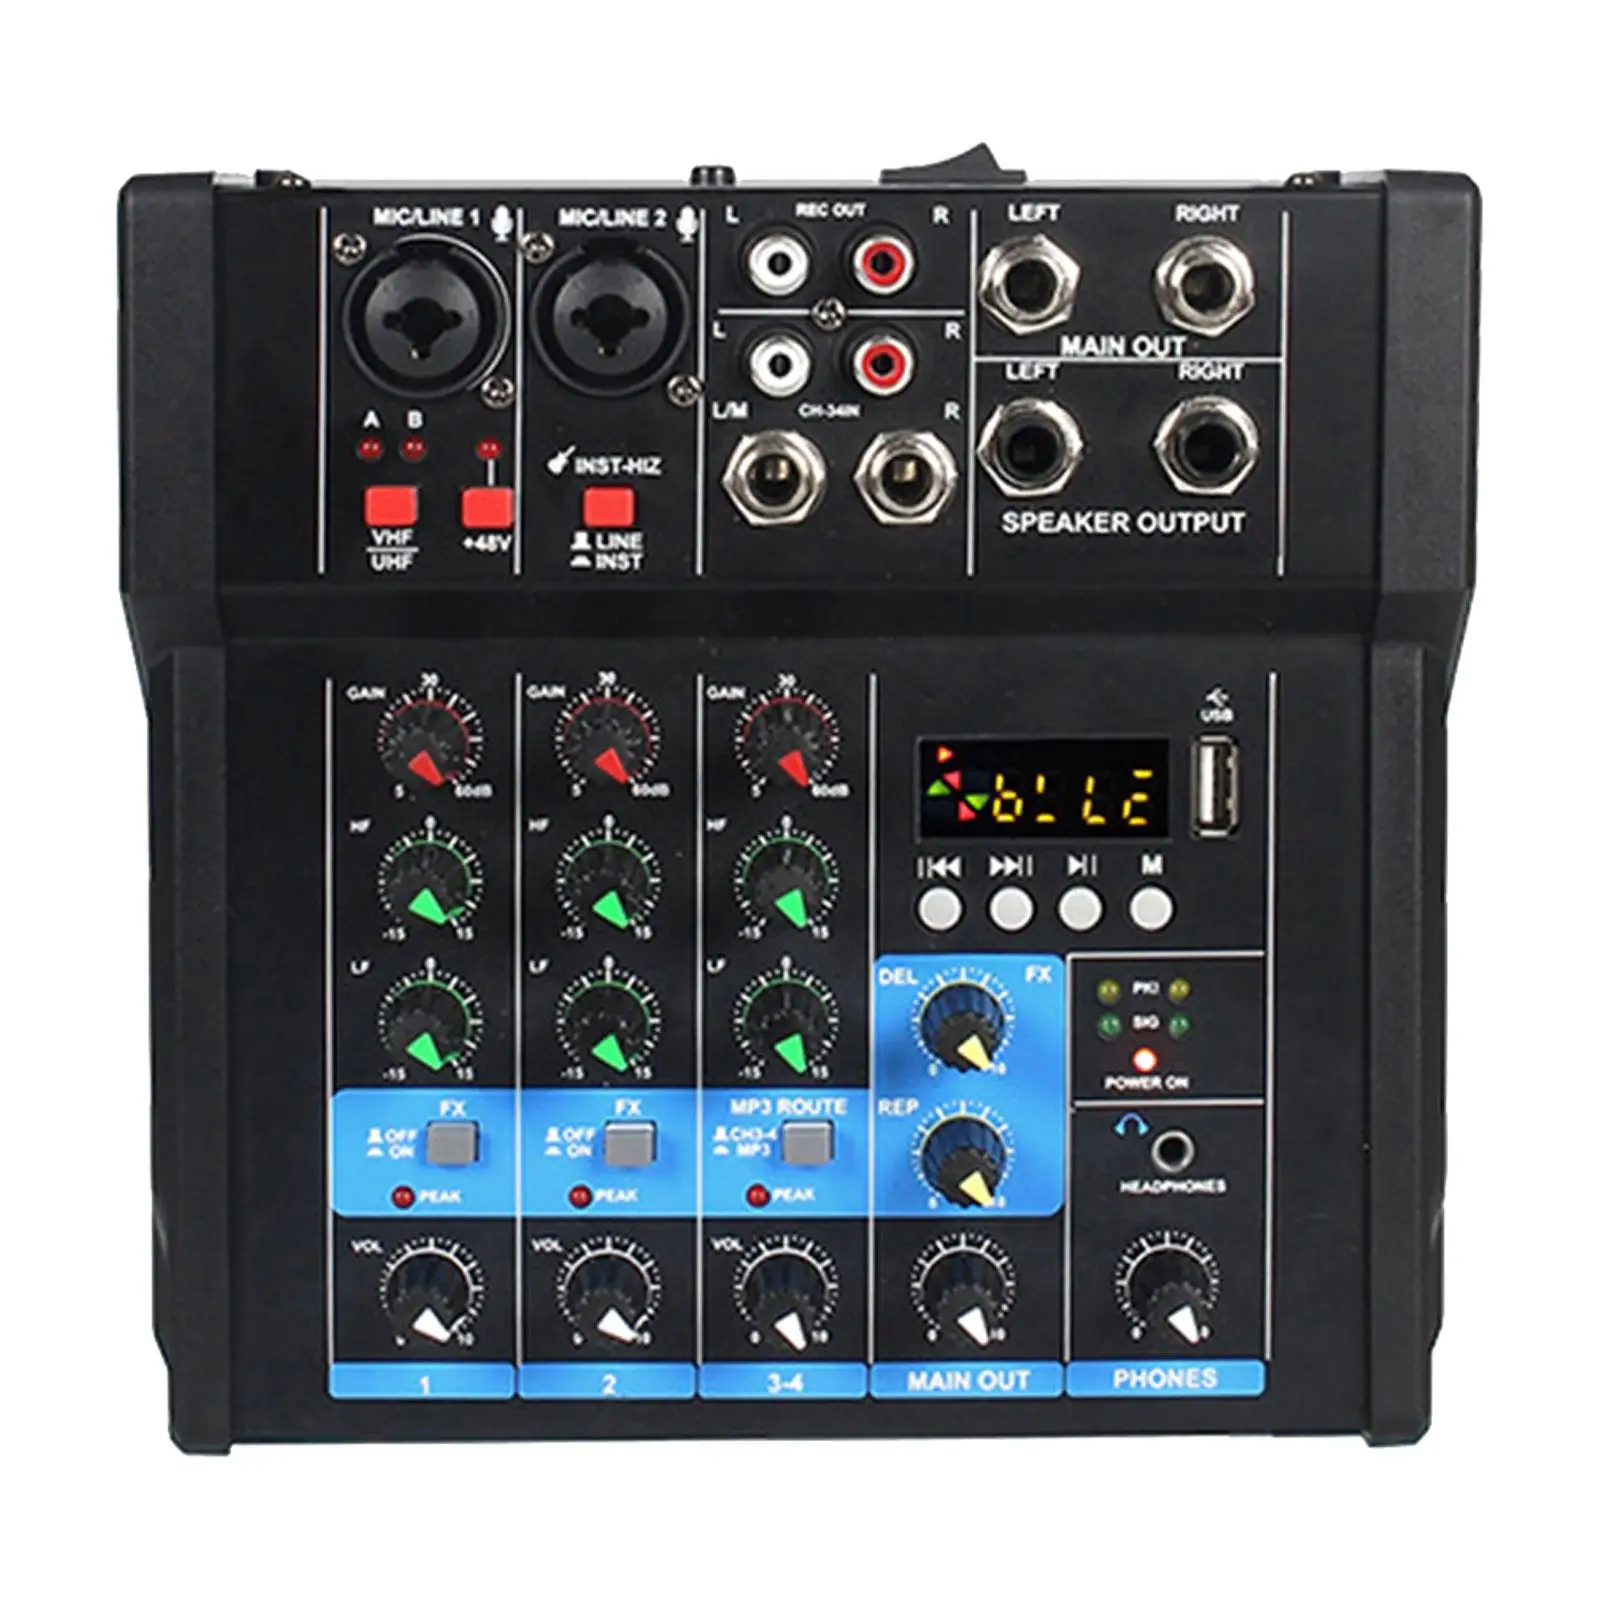 Audio Mixer Amplifier MP3 Bluetooth USB Interface Sound Board Console for Party DJ Mixing Karaoke Live Streaming Recording